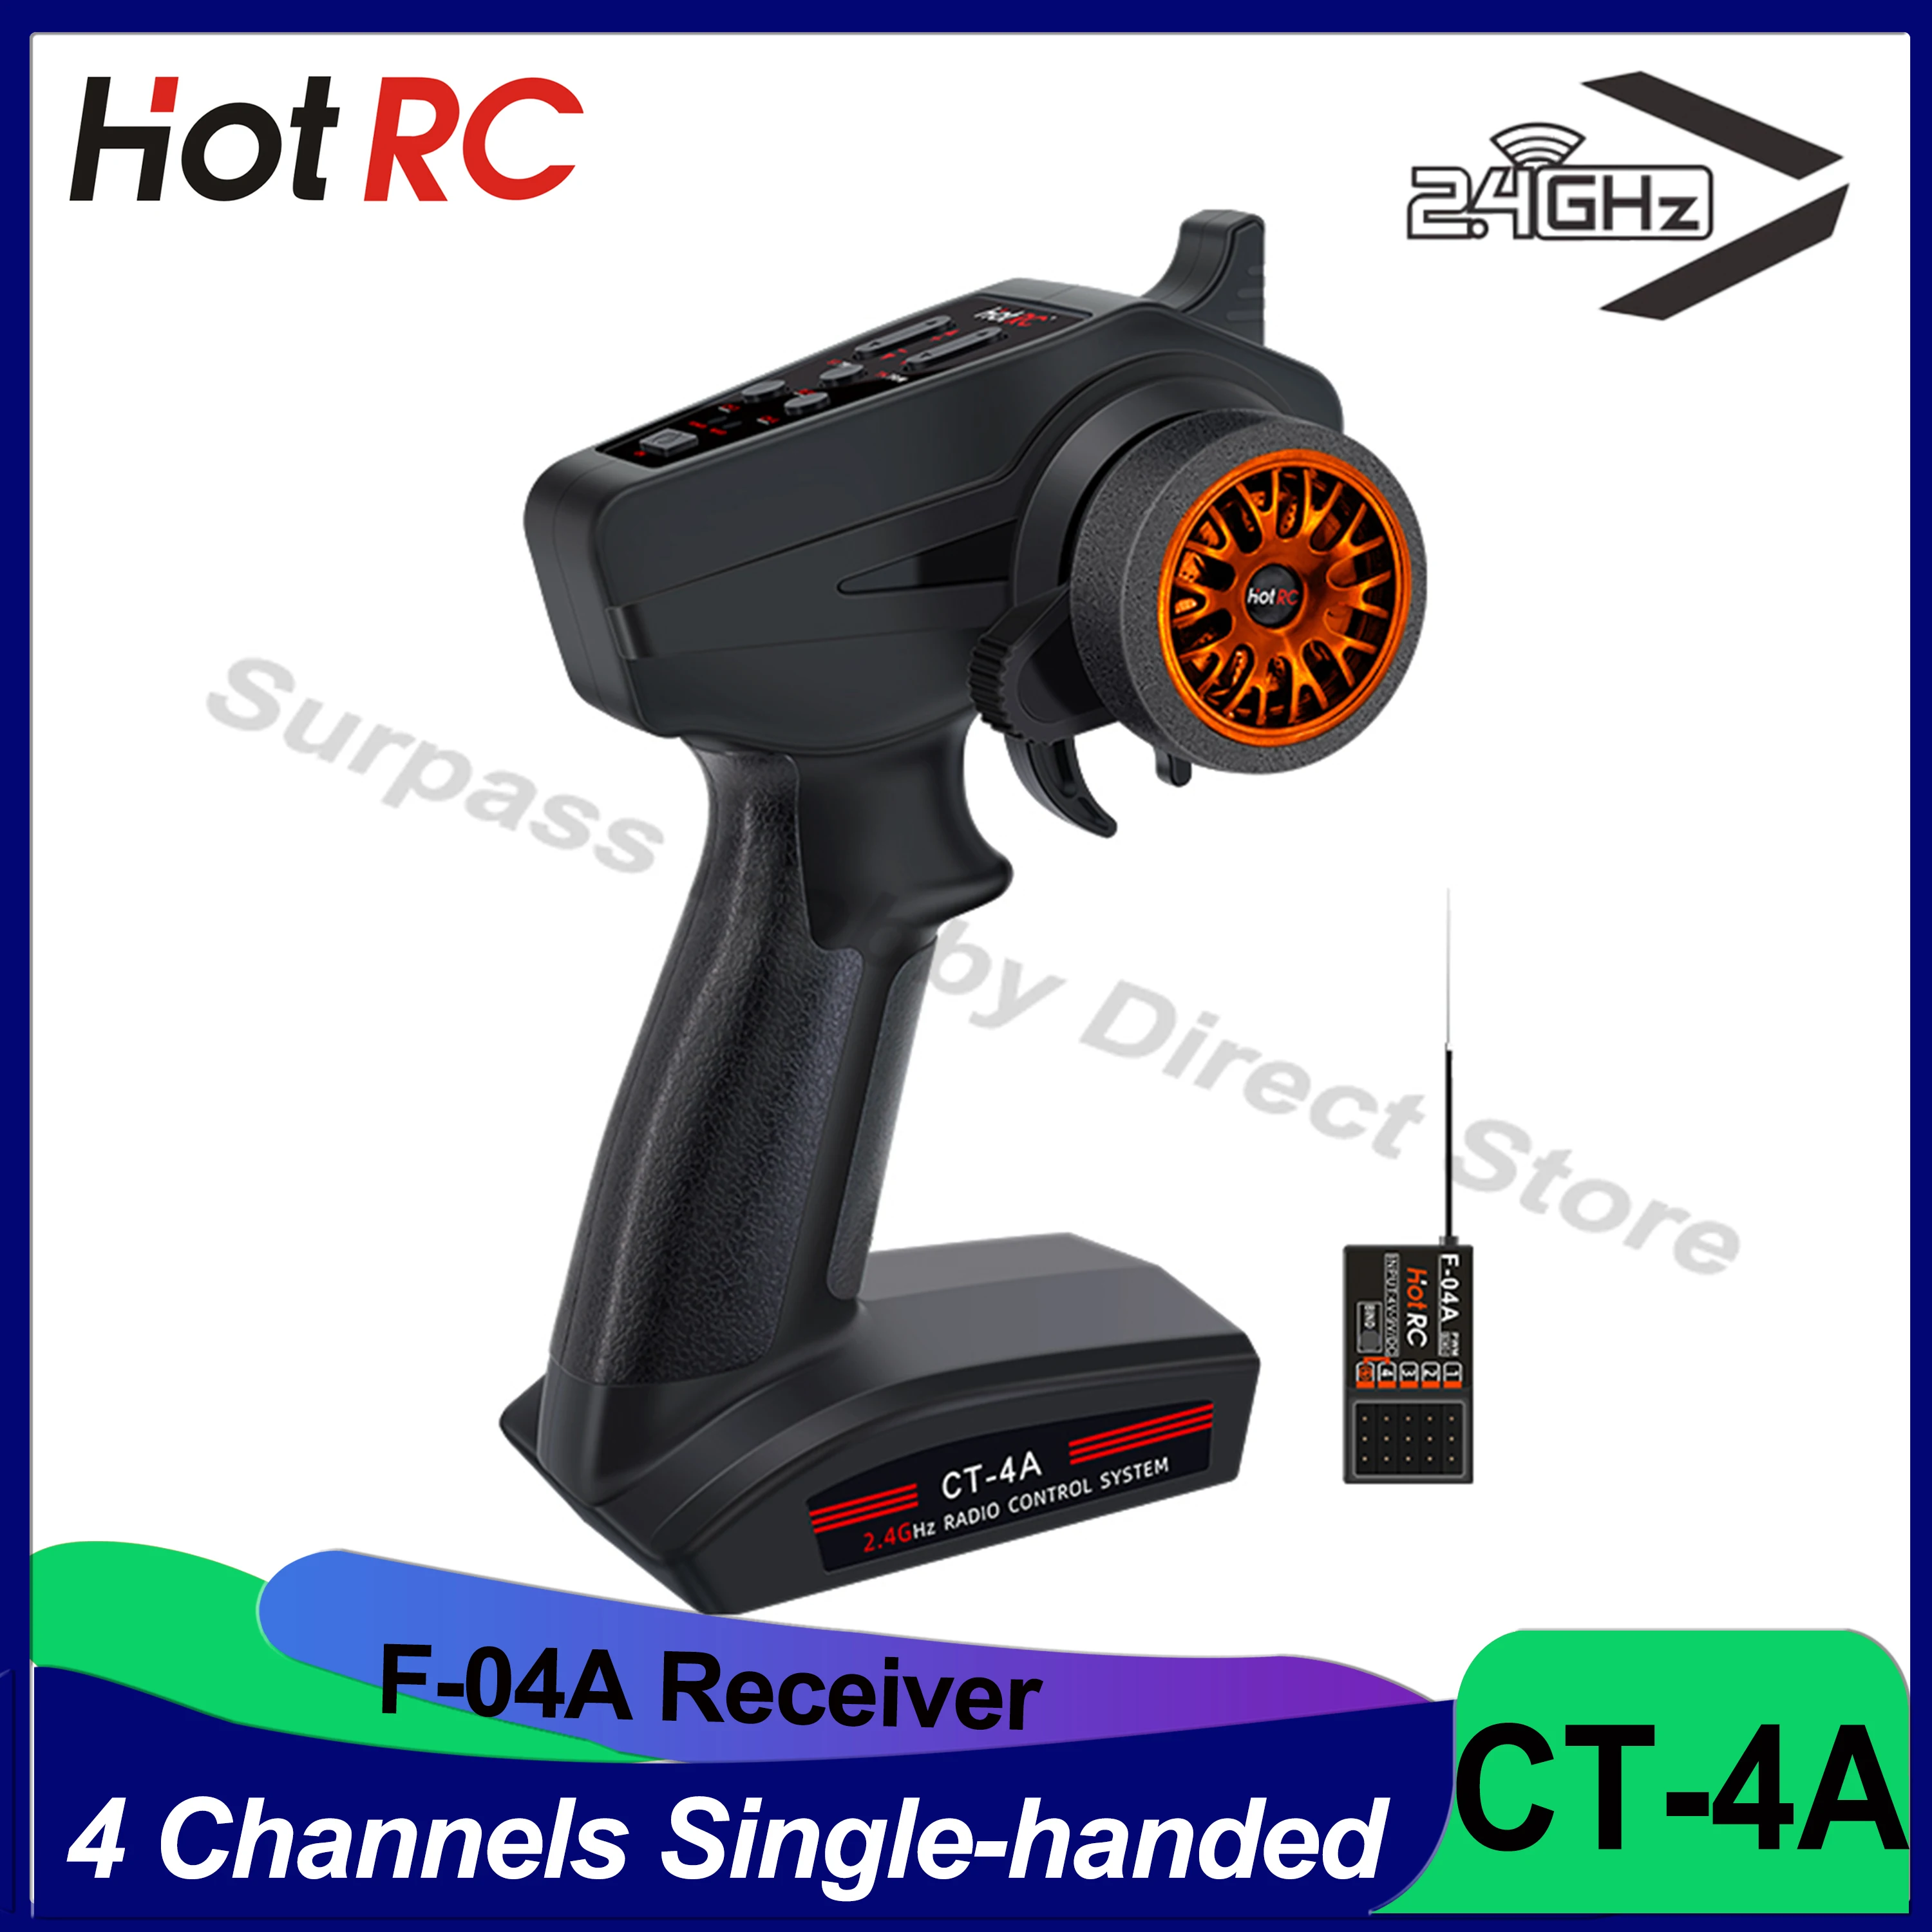 

HOTRC CT-4A 4CH 4 Channels Radio Control 2.4GHZ FHSS System 4V-9V F-04A Receiver with One-hand Transmitter for RC Car Boat Toys